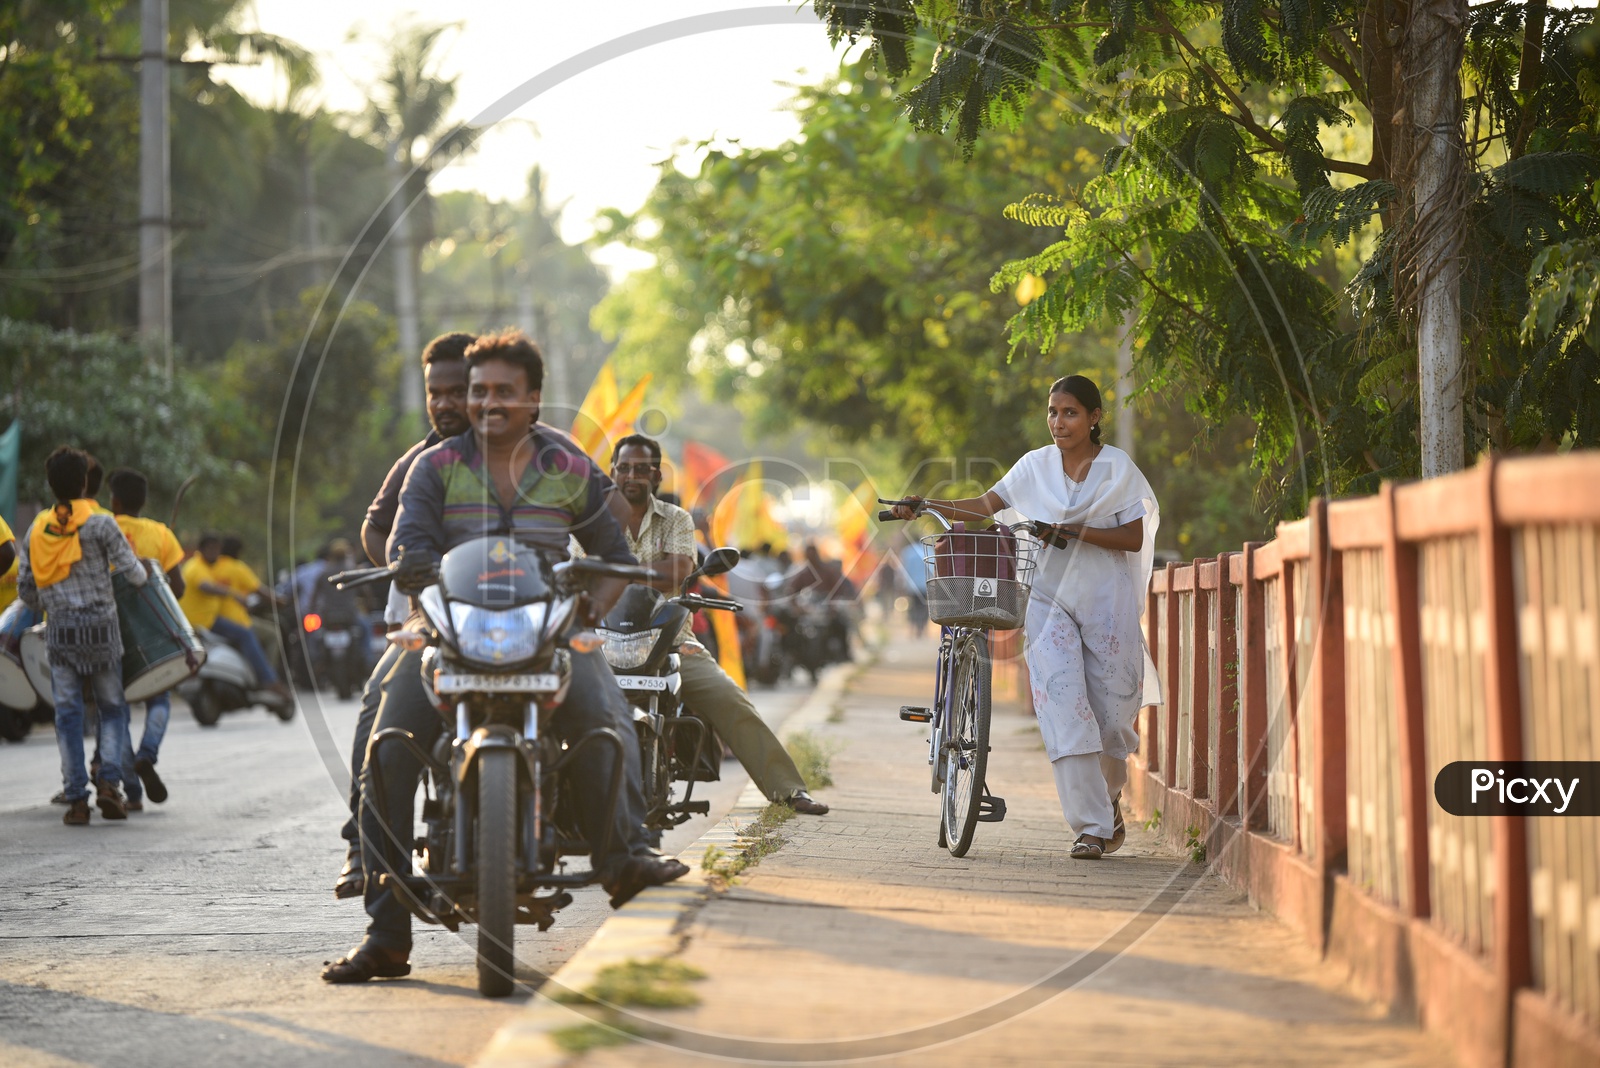 A woman walking on the footpath along with a bicycle as the TDP party supporters were riding bikes on the road during an election campaign rally